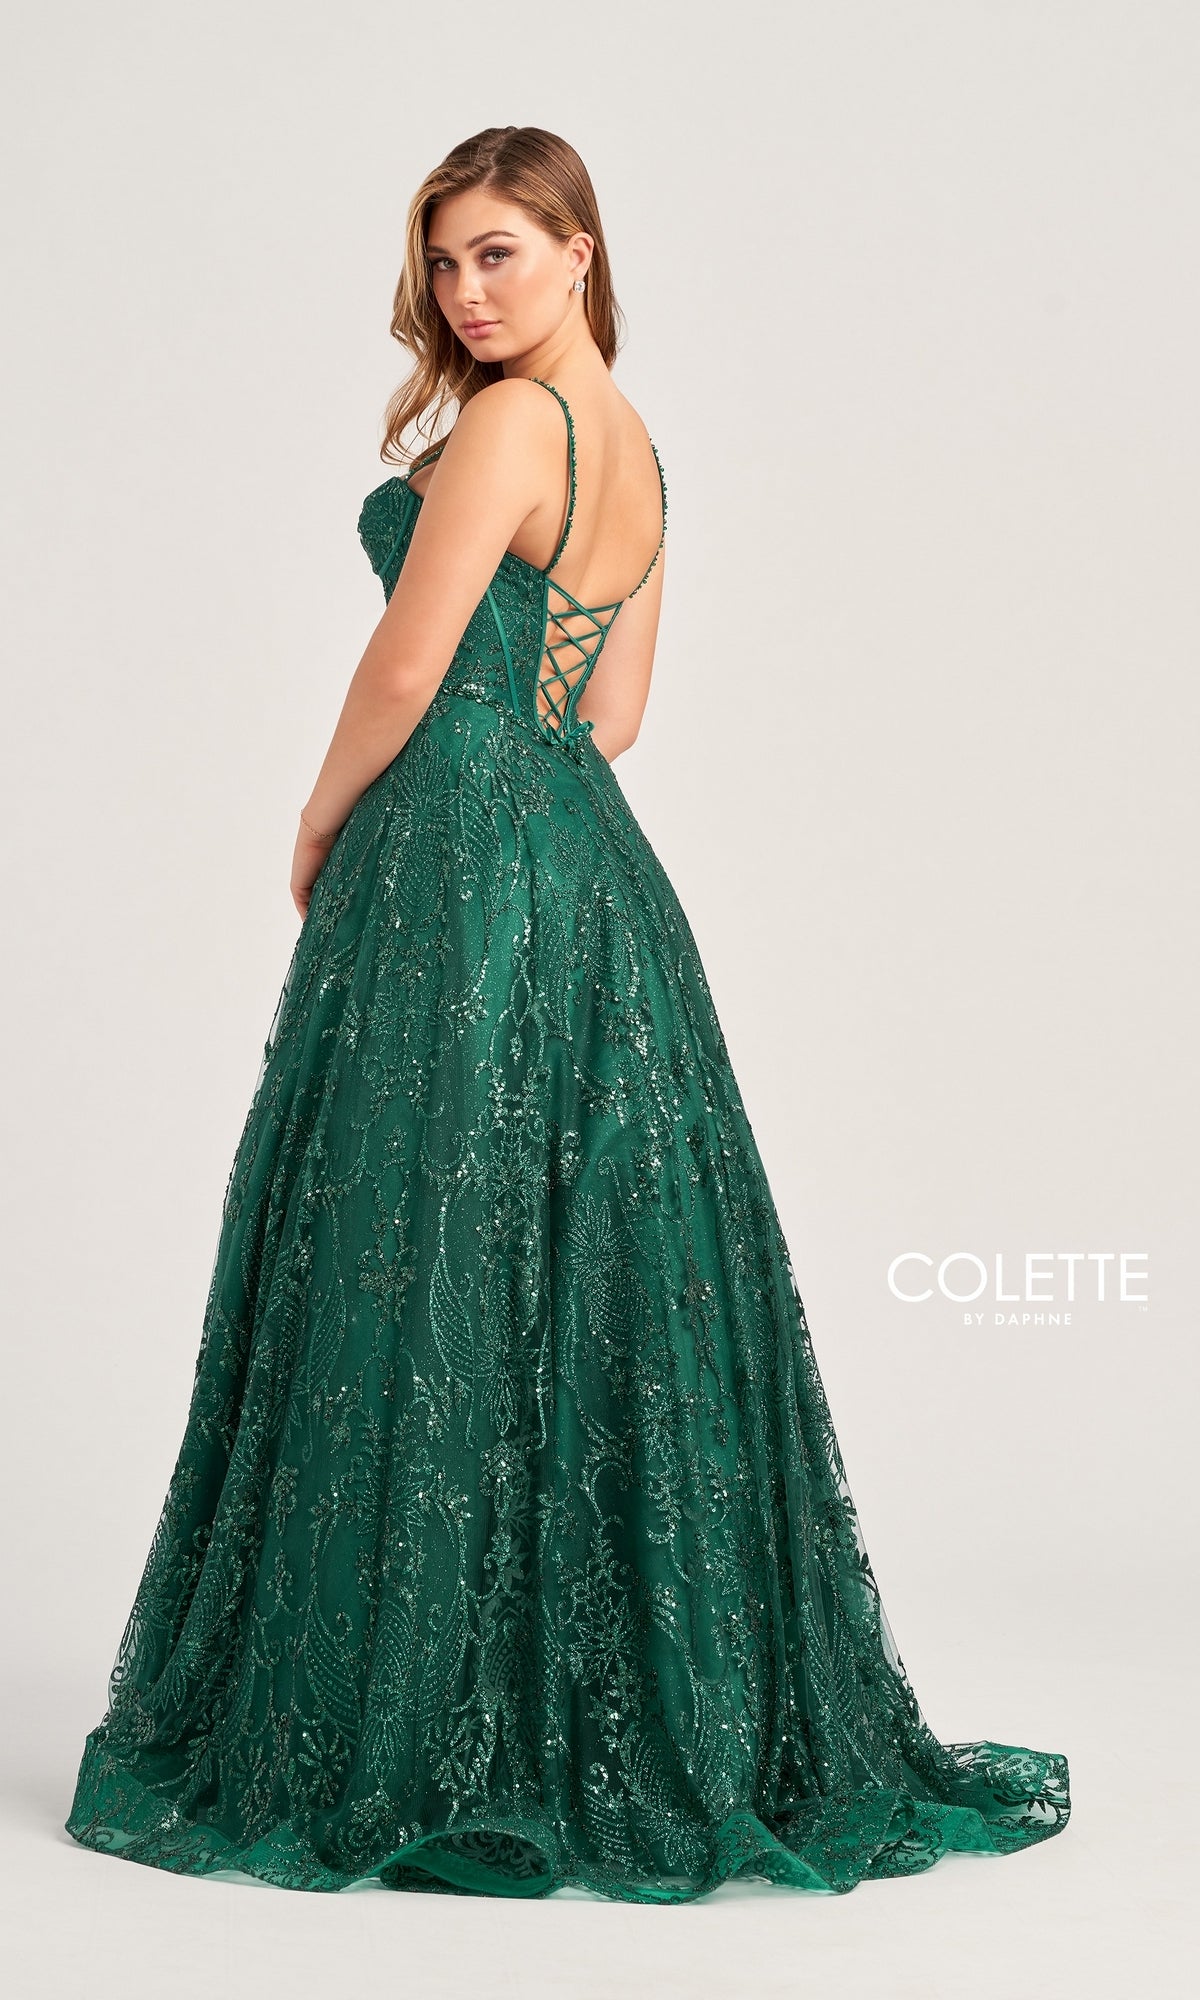 Colette Glitter-Tulle Long Prom Ball Gown CL5117